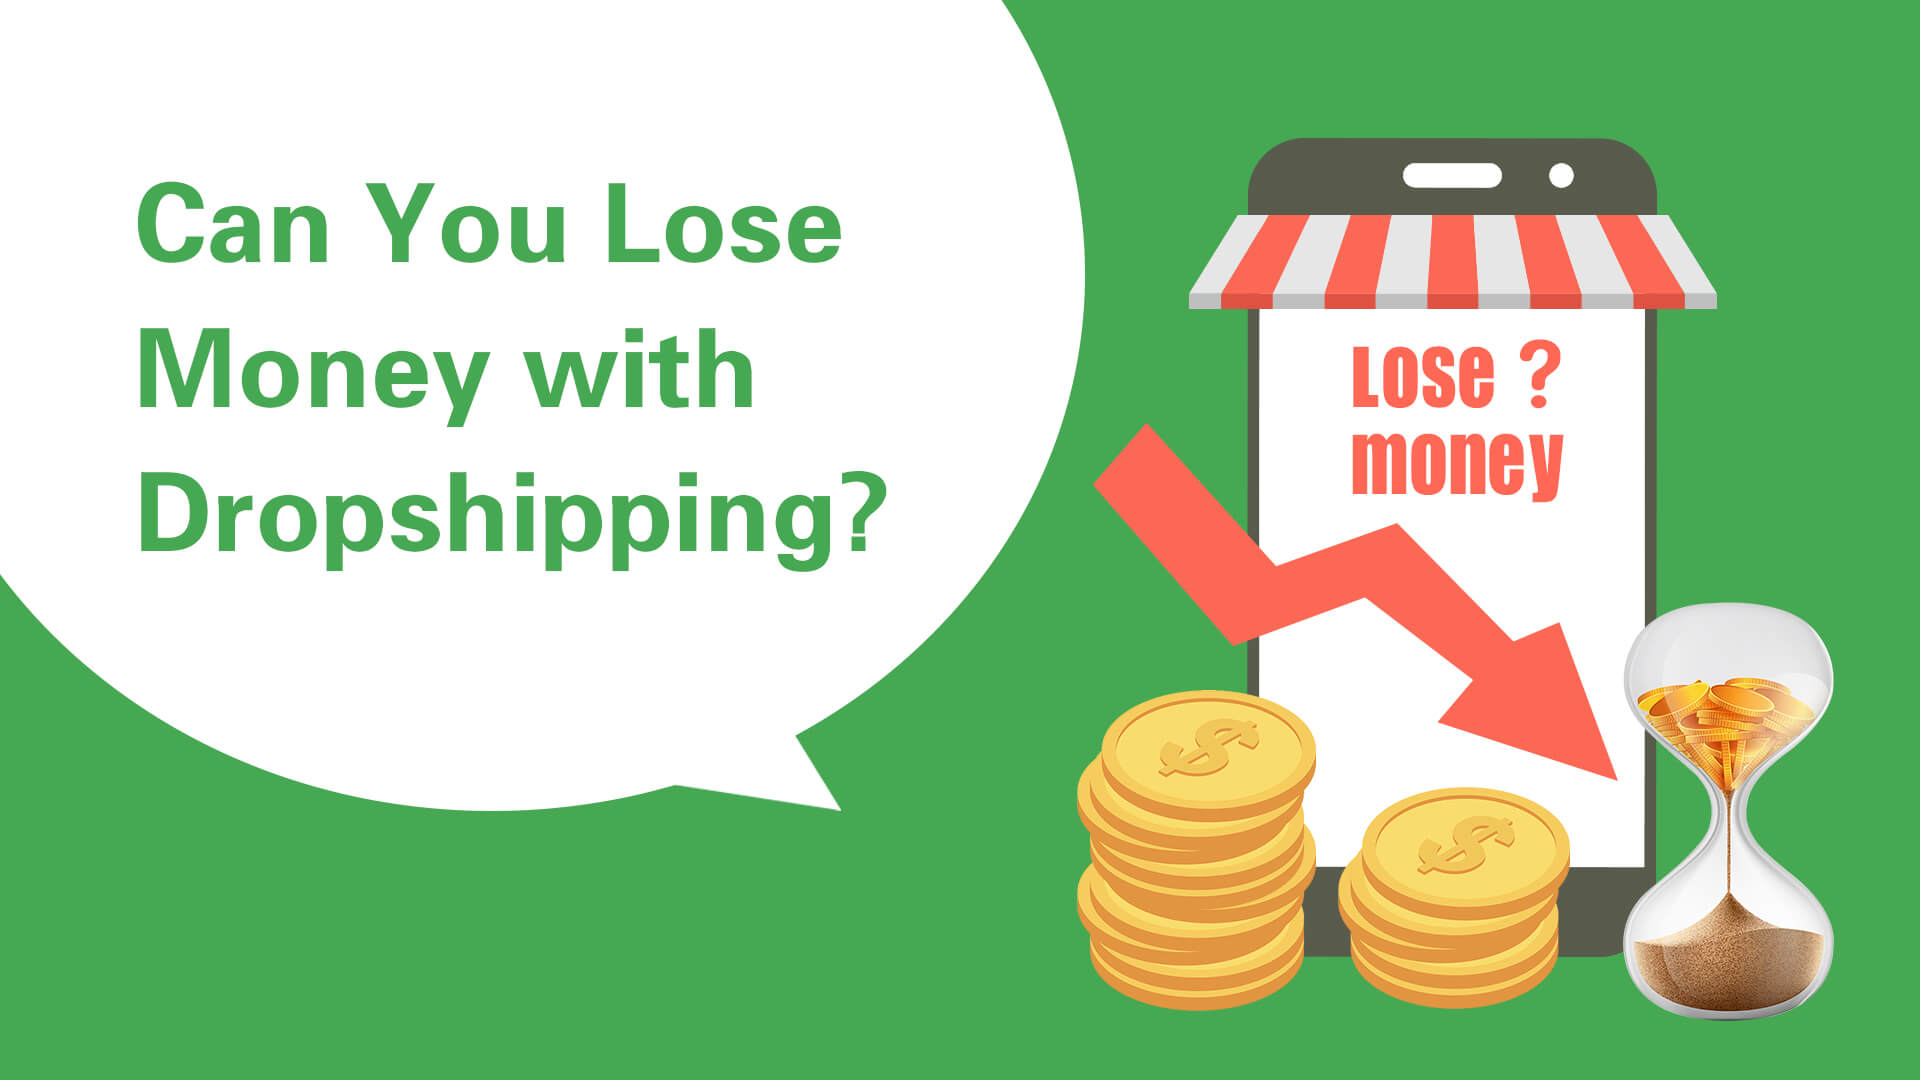 Dropshipping: If you want to learn how to make easy money